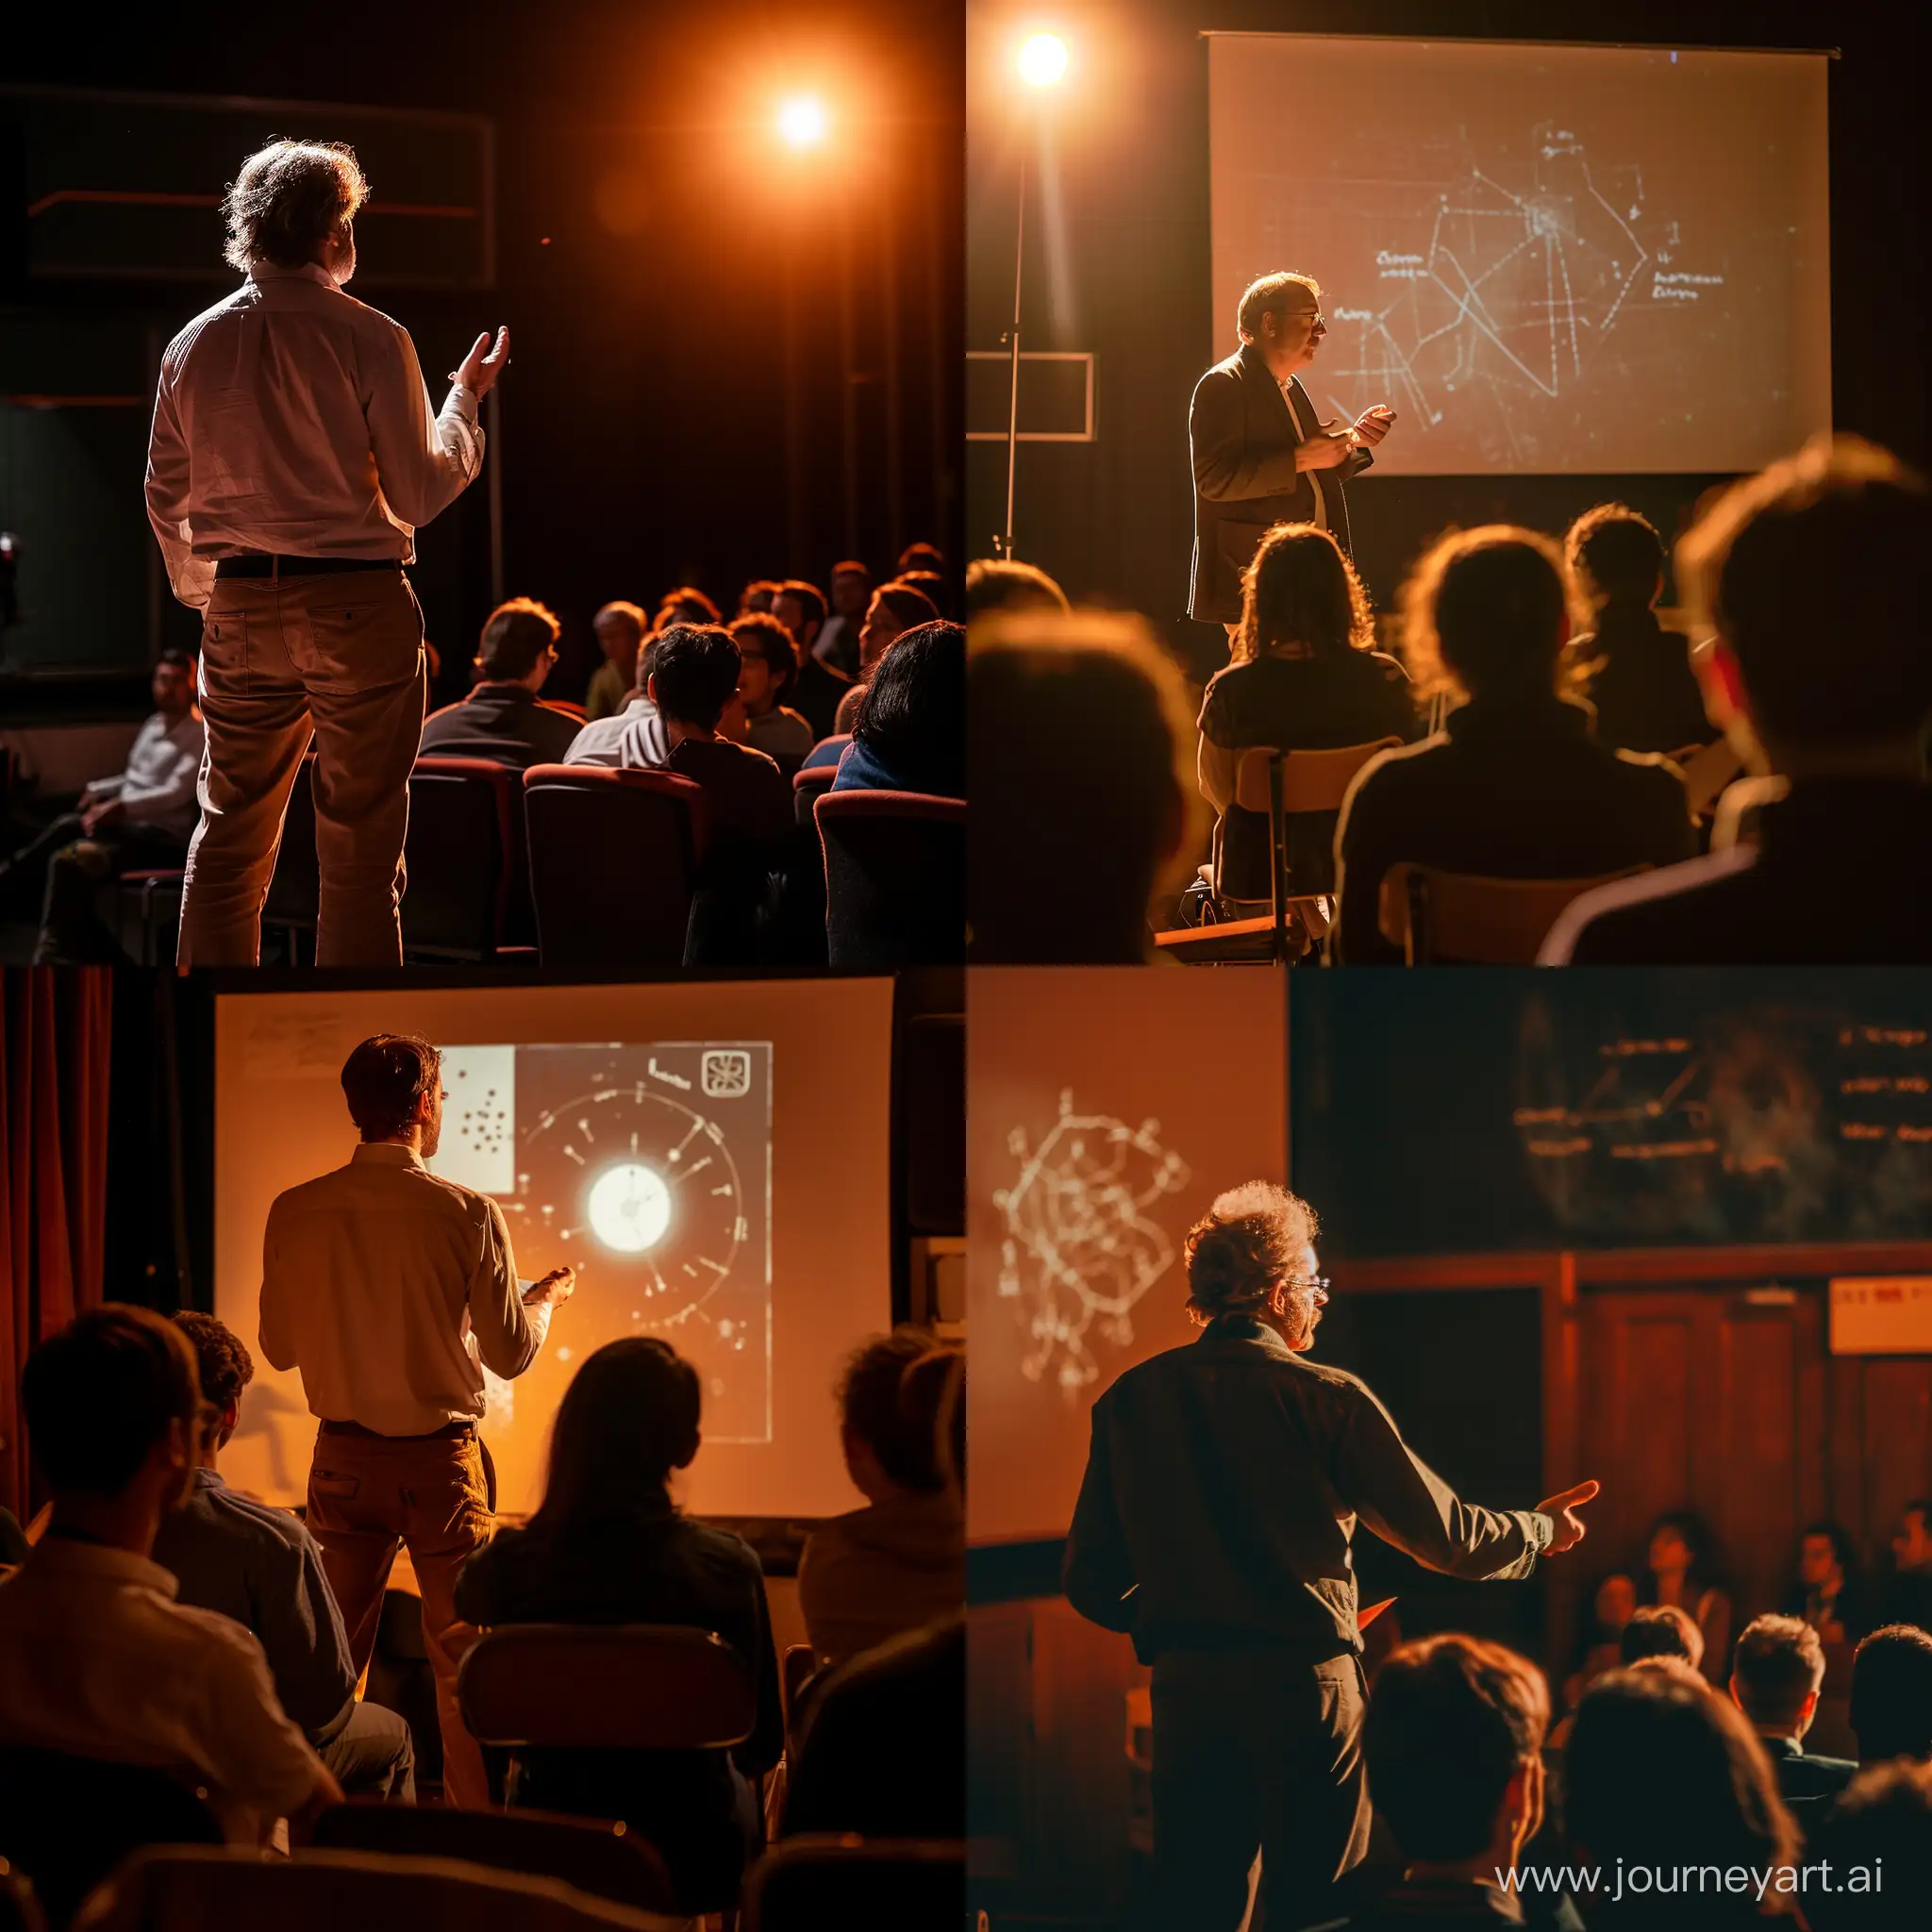 a physicist on stage explaining a theory that upends understanding, with audience in awe, but subtle; mood is of discovery, shot from behind, warm tones, 50 mm lens